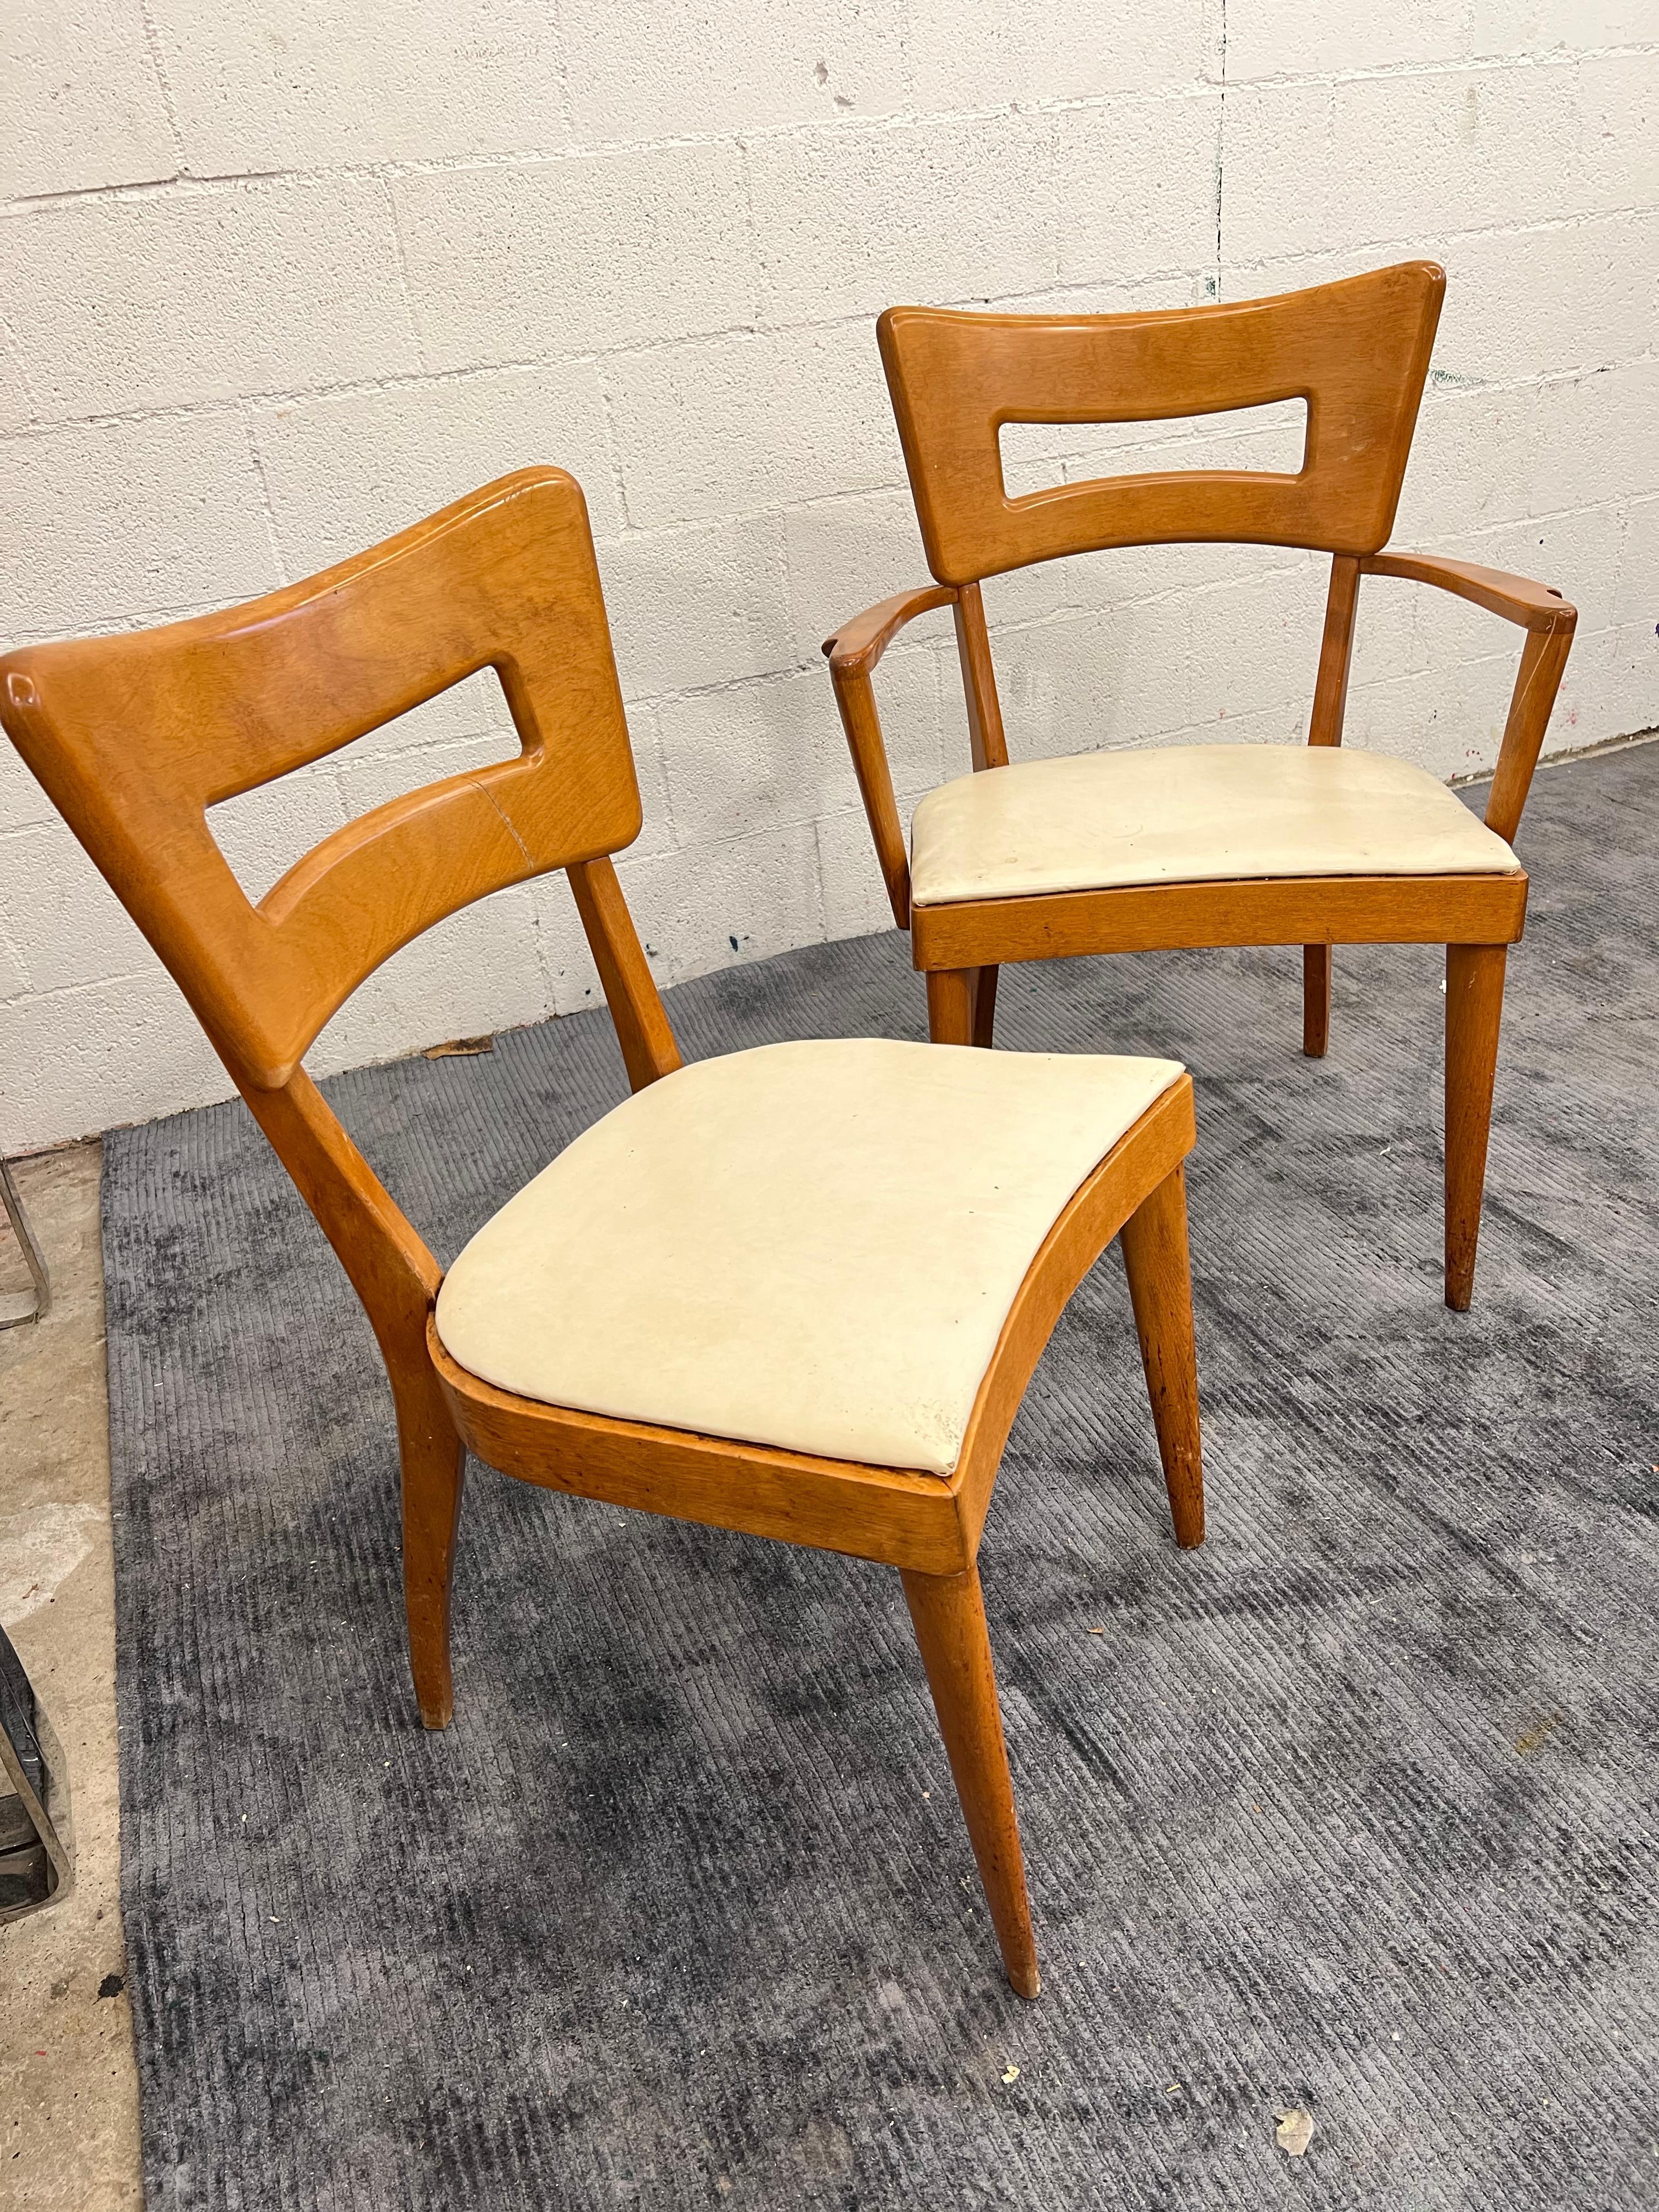 1960s Set of 4 Heywood Wakefield Dog bone Dining Chair In Distressed Condition For Sale In Los Angeles, CA